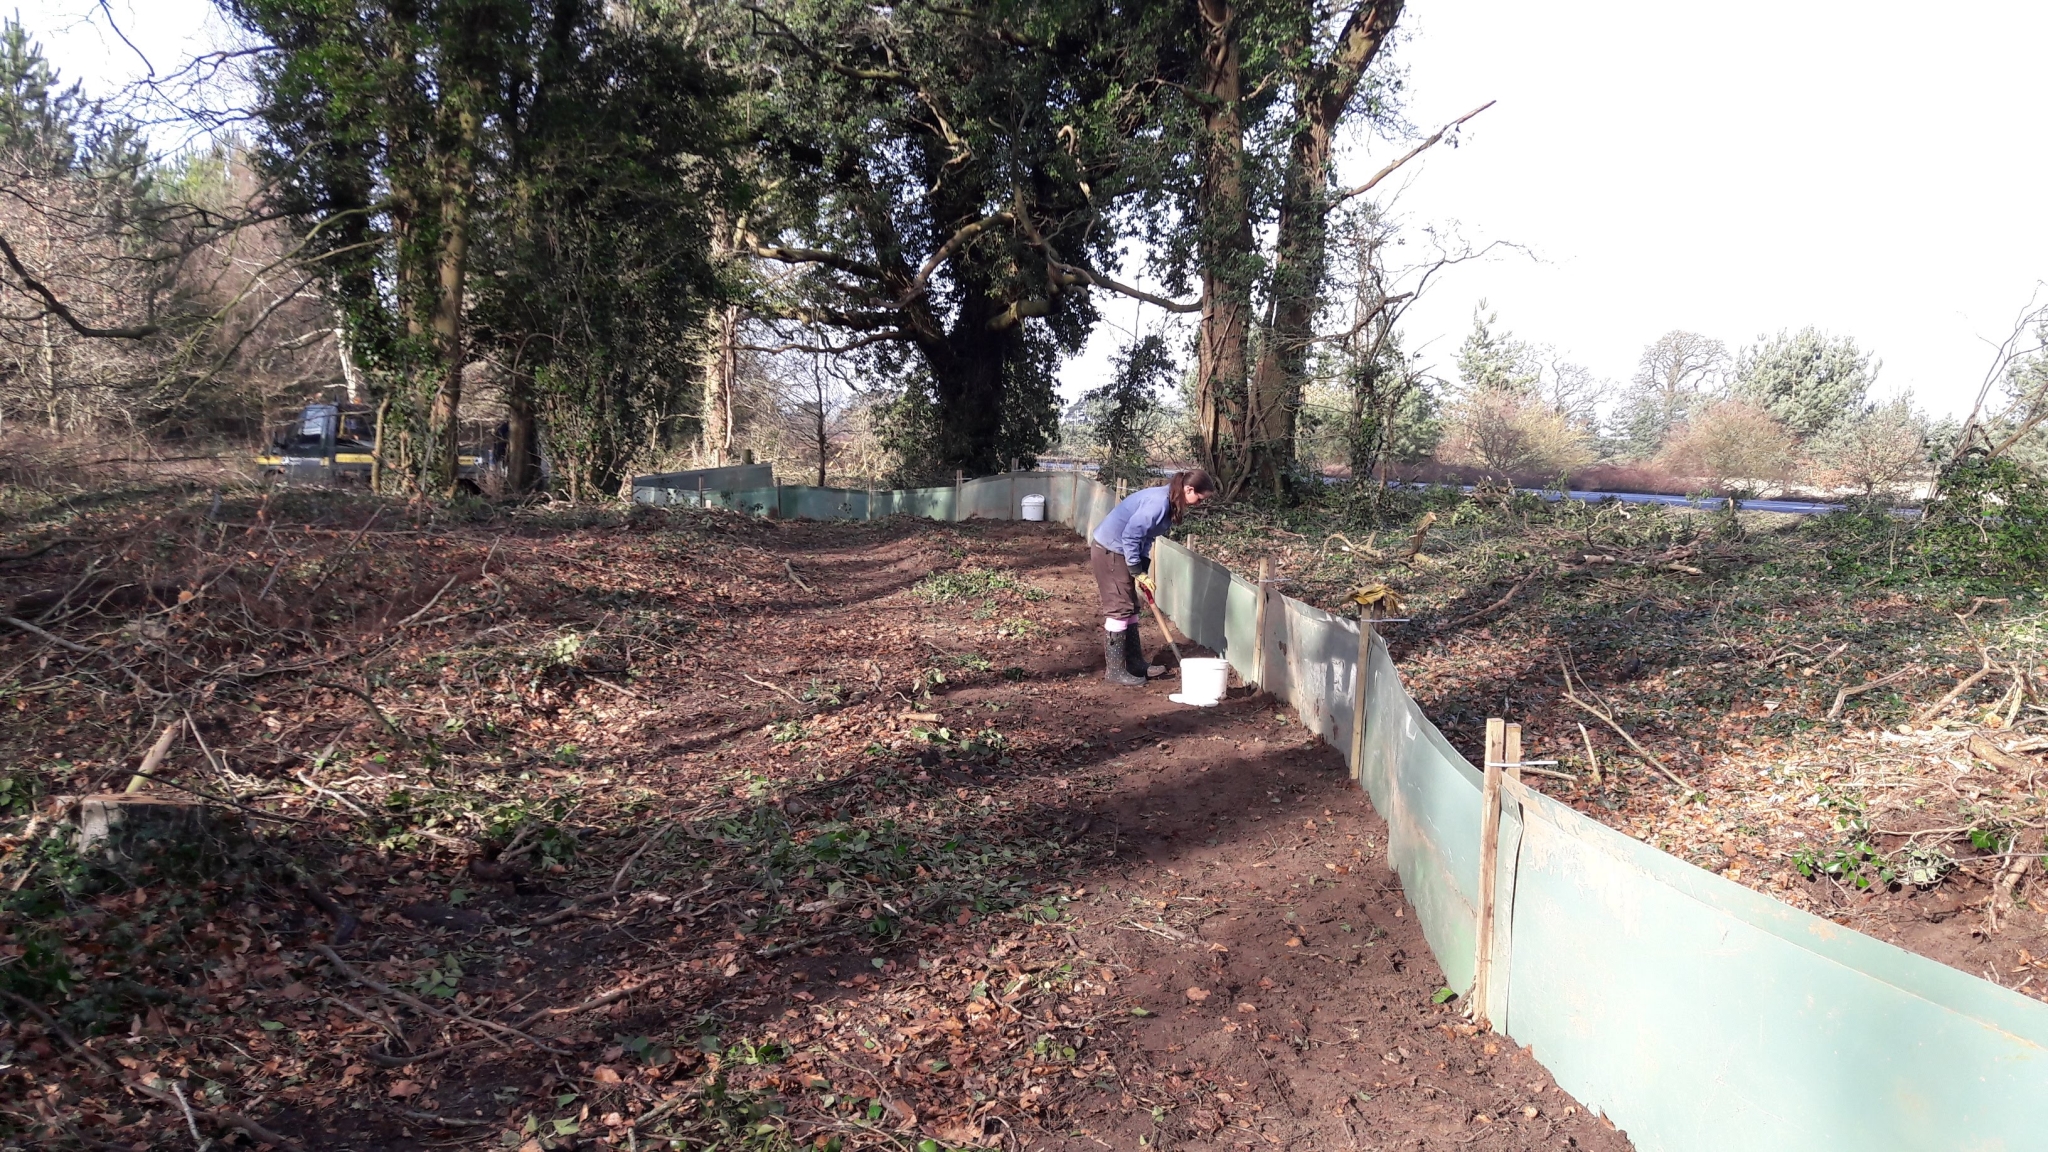 A photo from the FoTF Conservation Event - February 2018 - Erecting the Toad Fence at Cranwich : A section of erected fence, with a volunteer in the background checking the fence